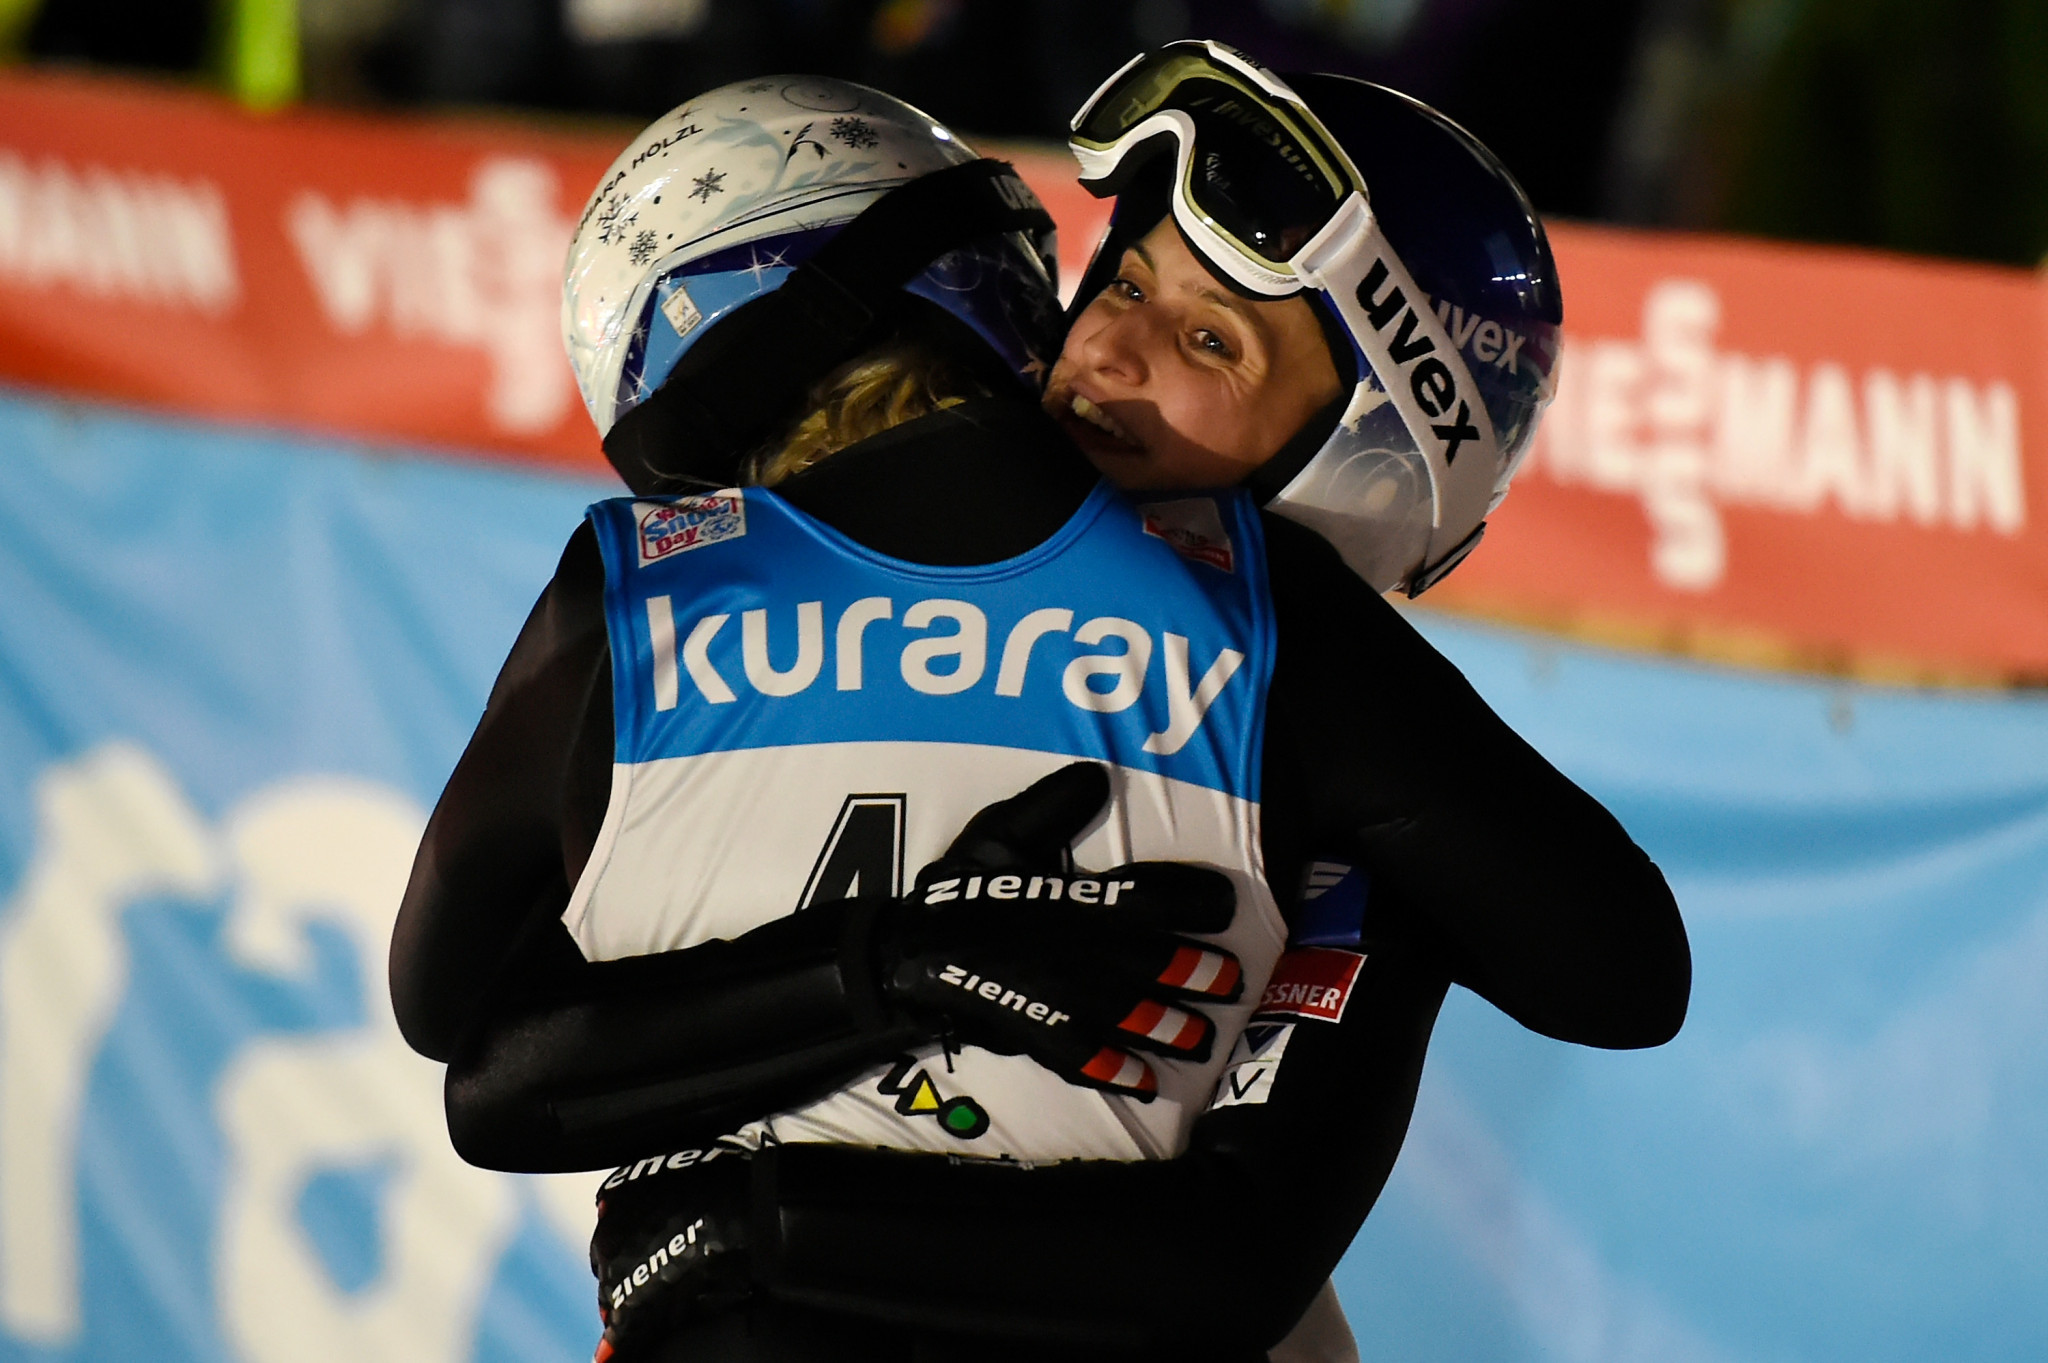 FIS Ski Jumping World Cup rivals Chiara Hölzl and Eva Pinkelnig combined to win the team competition for Austria ©Getty Images